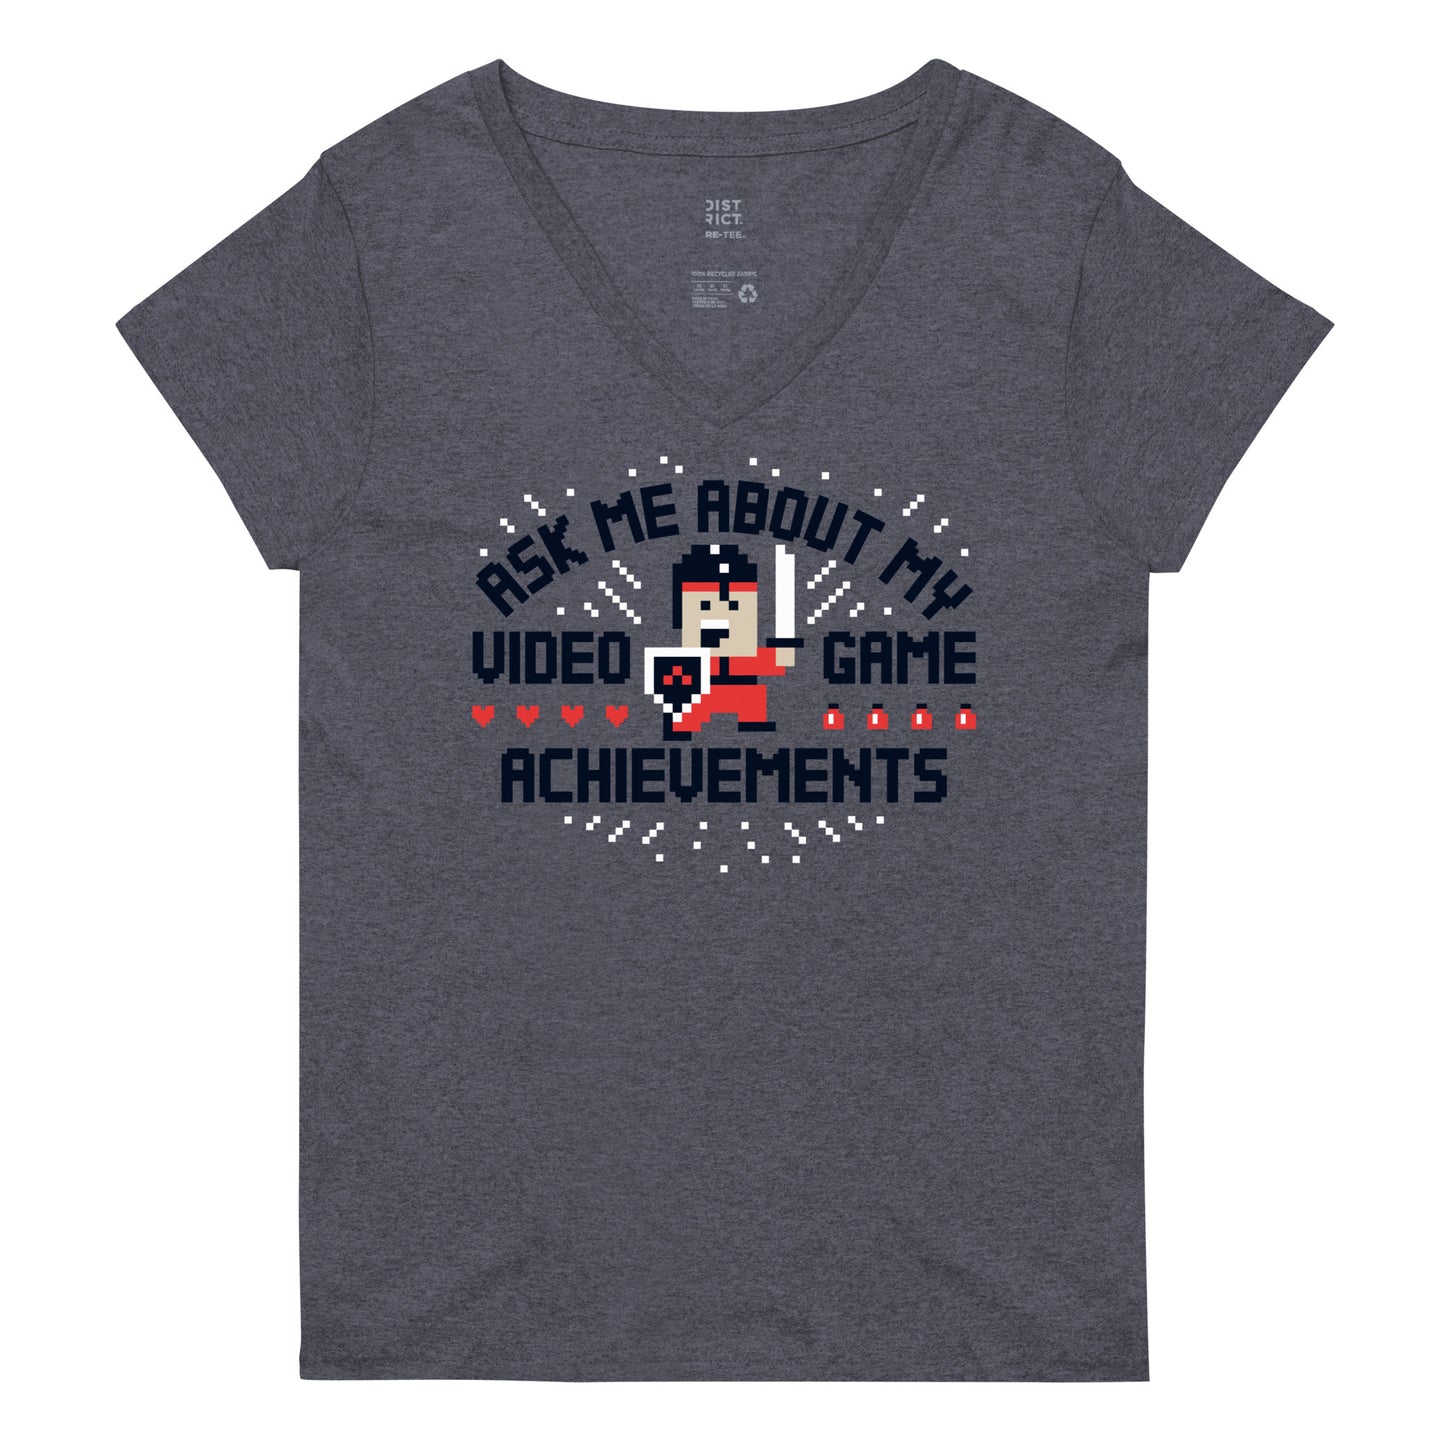 Ask Me About My Video Game Achievements Women's V-Neck Tee